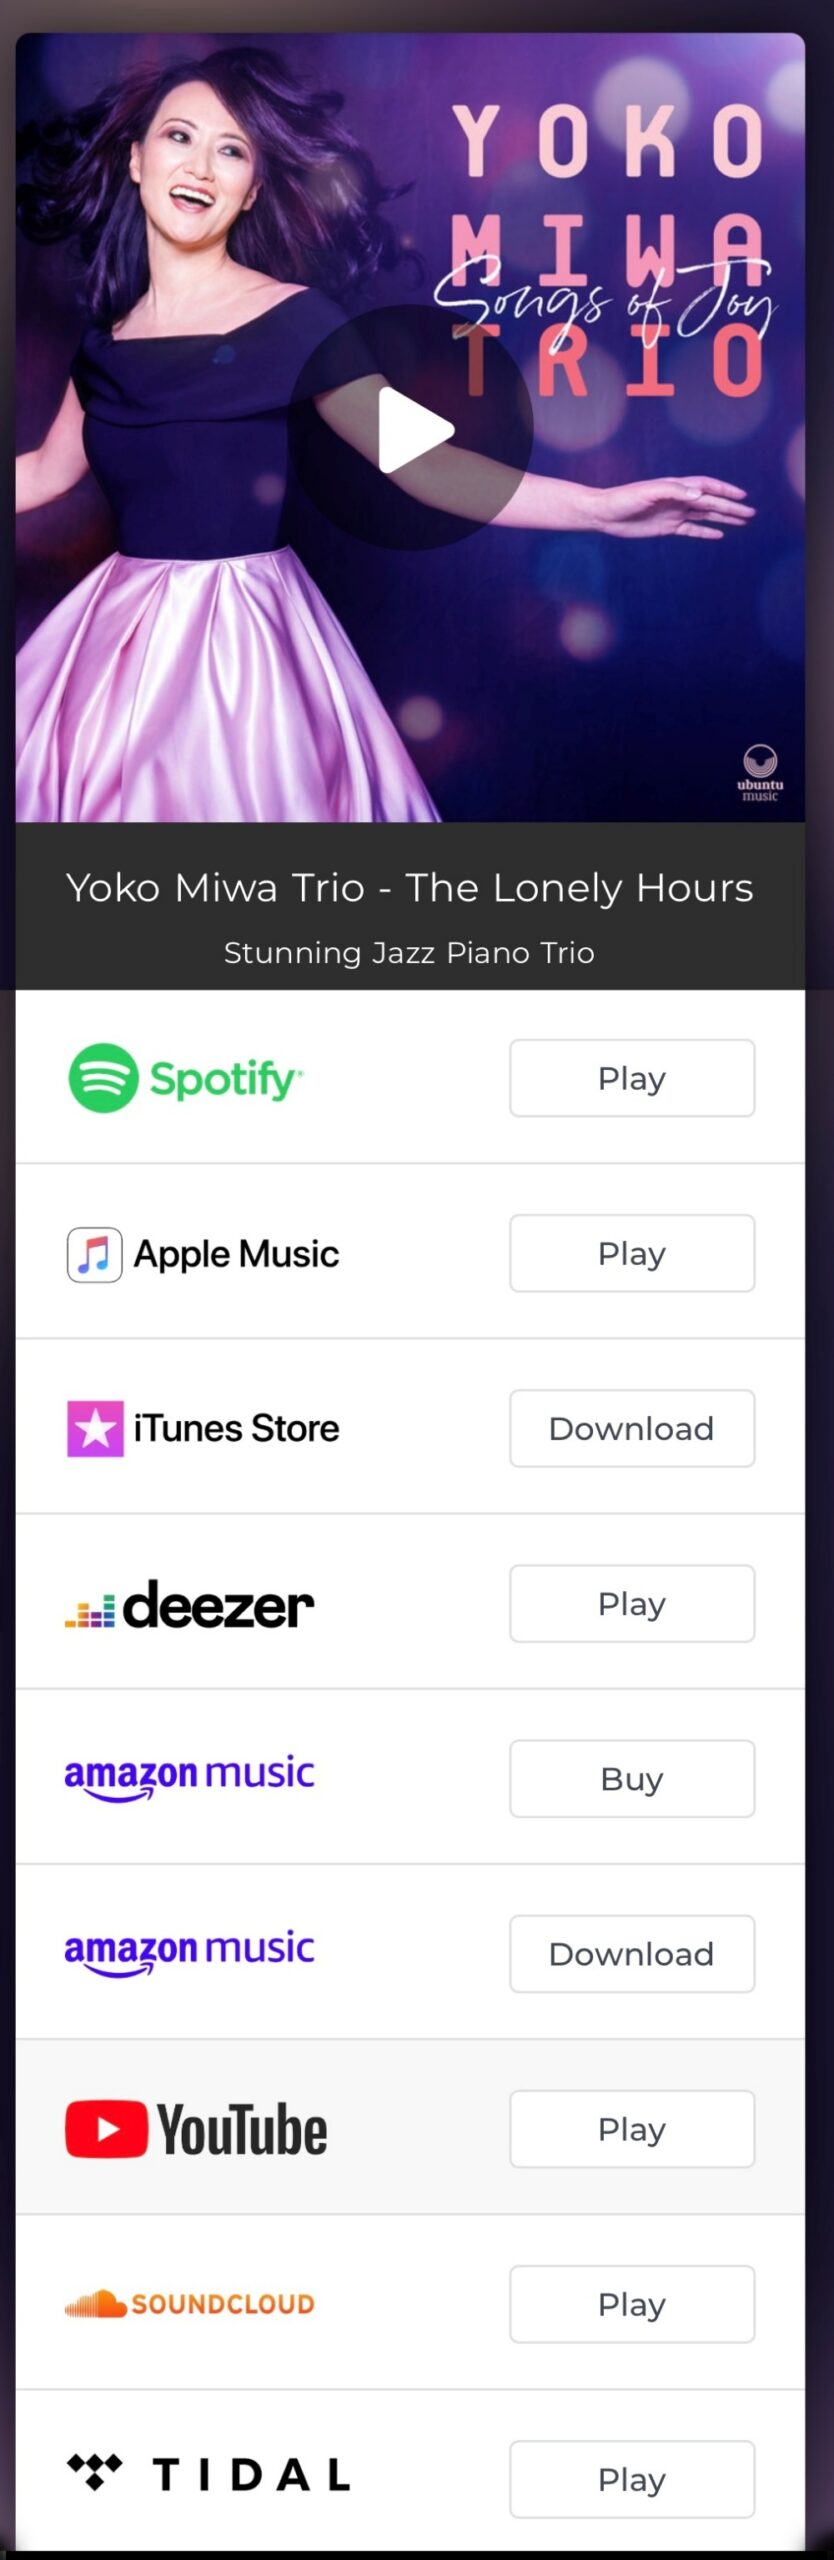 The Lonely Hours - New Single Released by the Yoko Miwa Trio